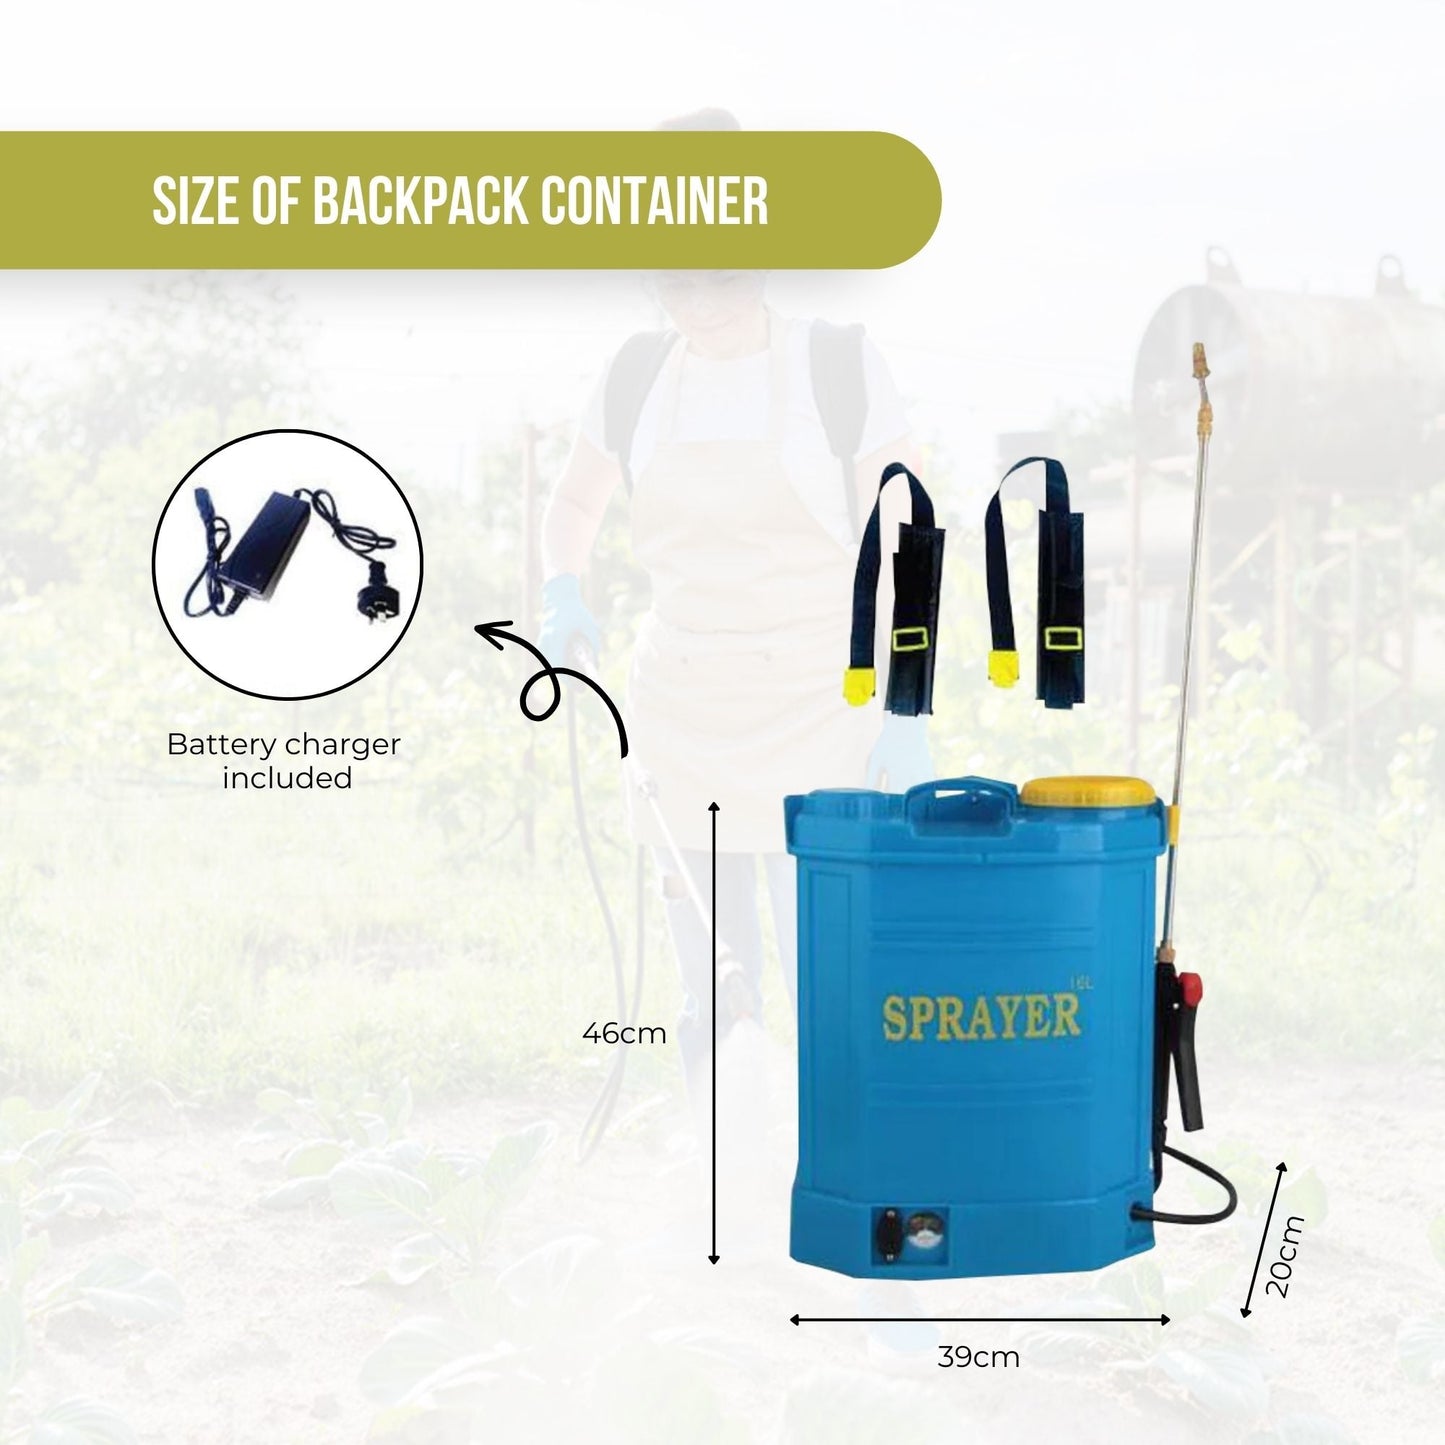 16L Rechargeable Backpack Pressure Sprayer - Portable Electric Garden Weed Pump